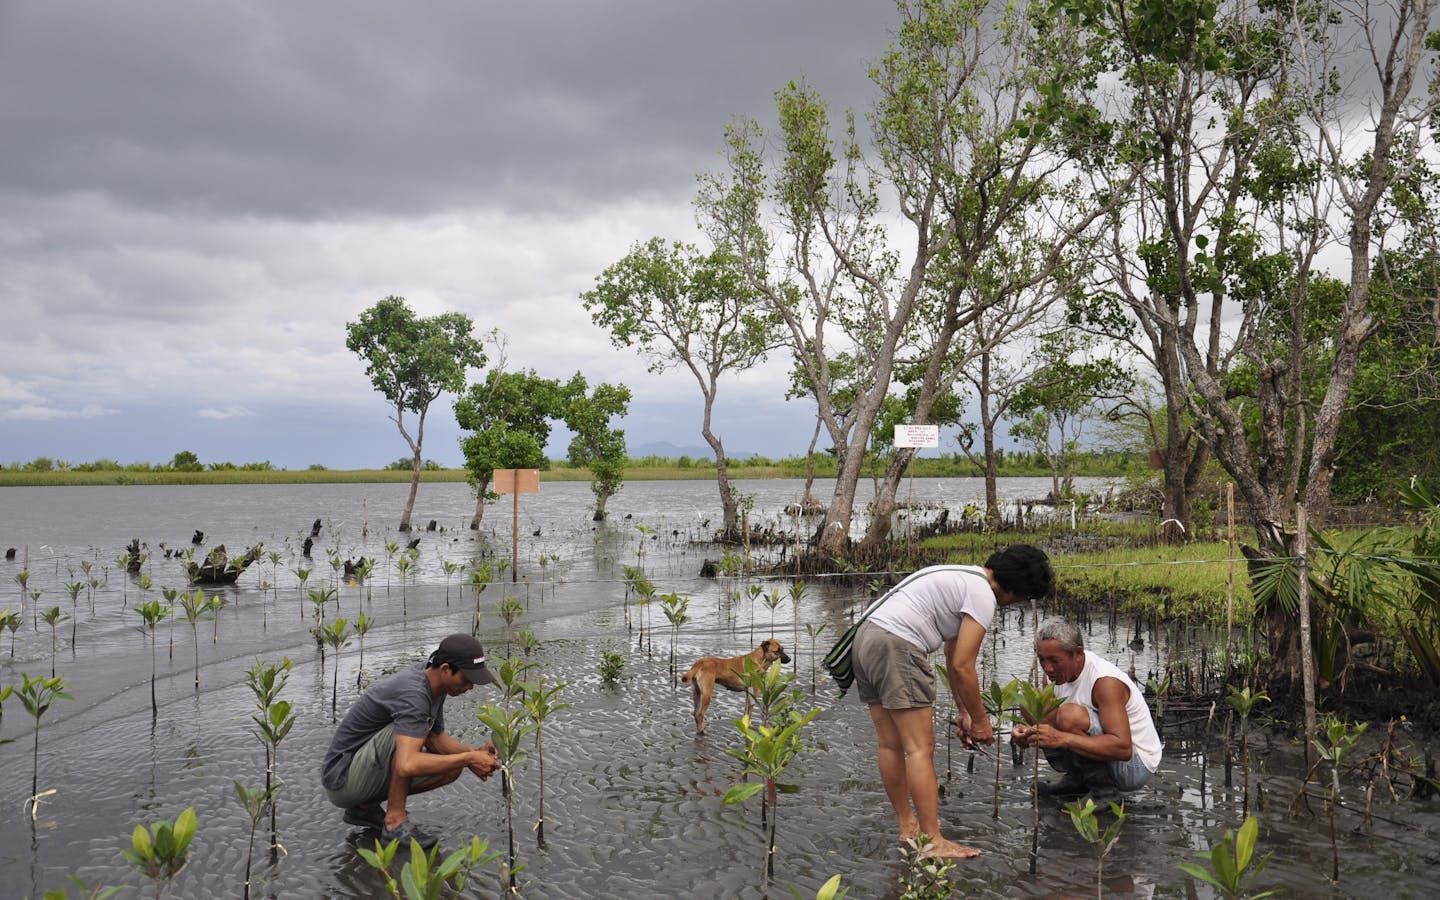 The Silonay community is working together to plant a mangrove forest that will protect the ecology and their future.